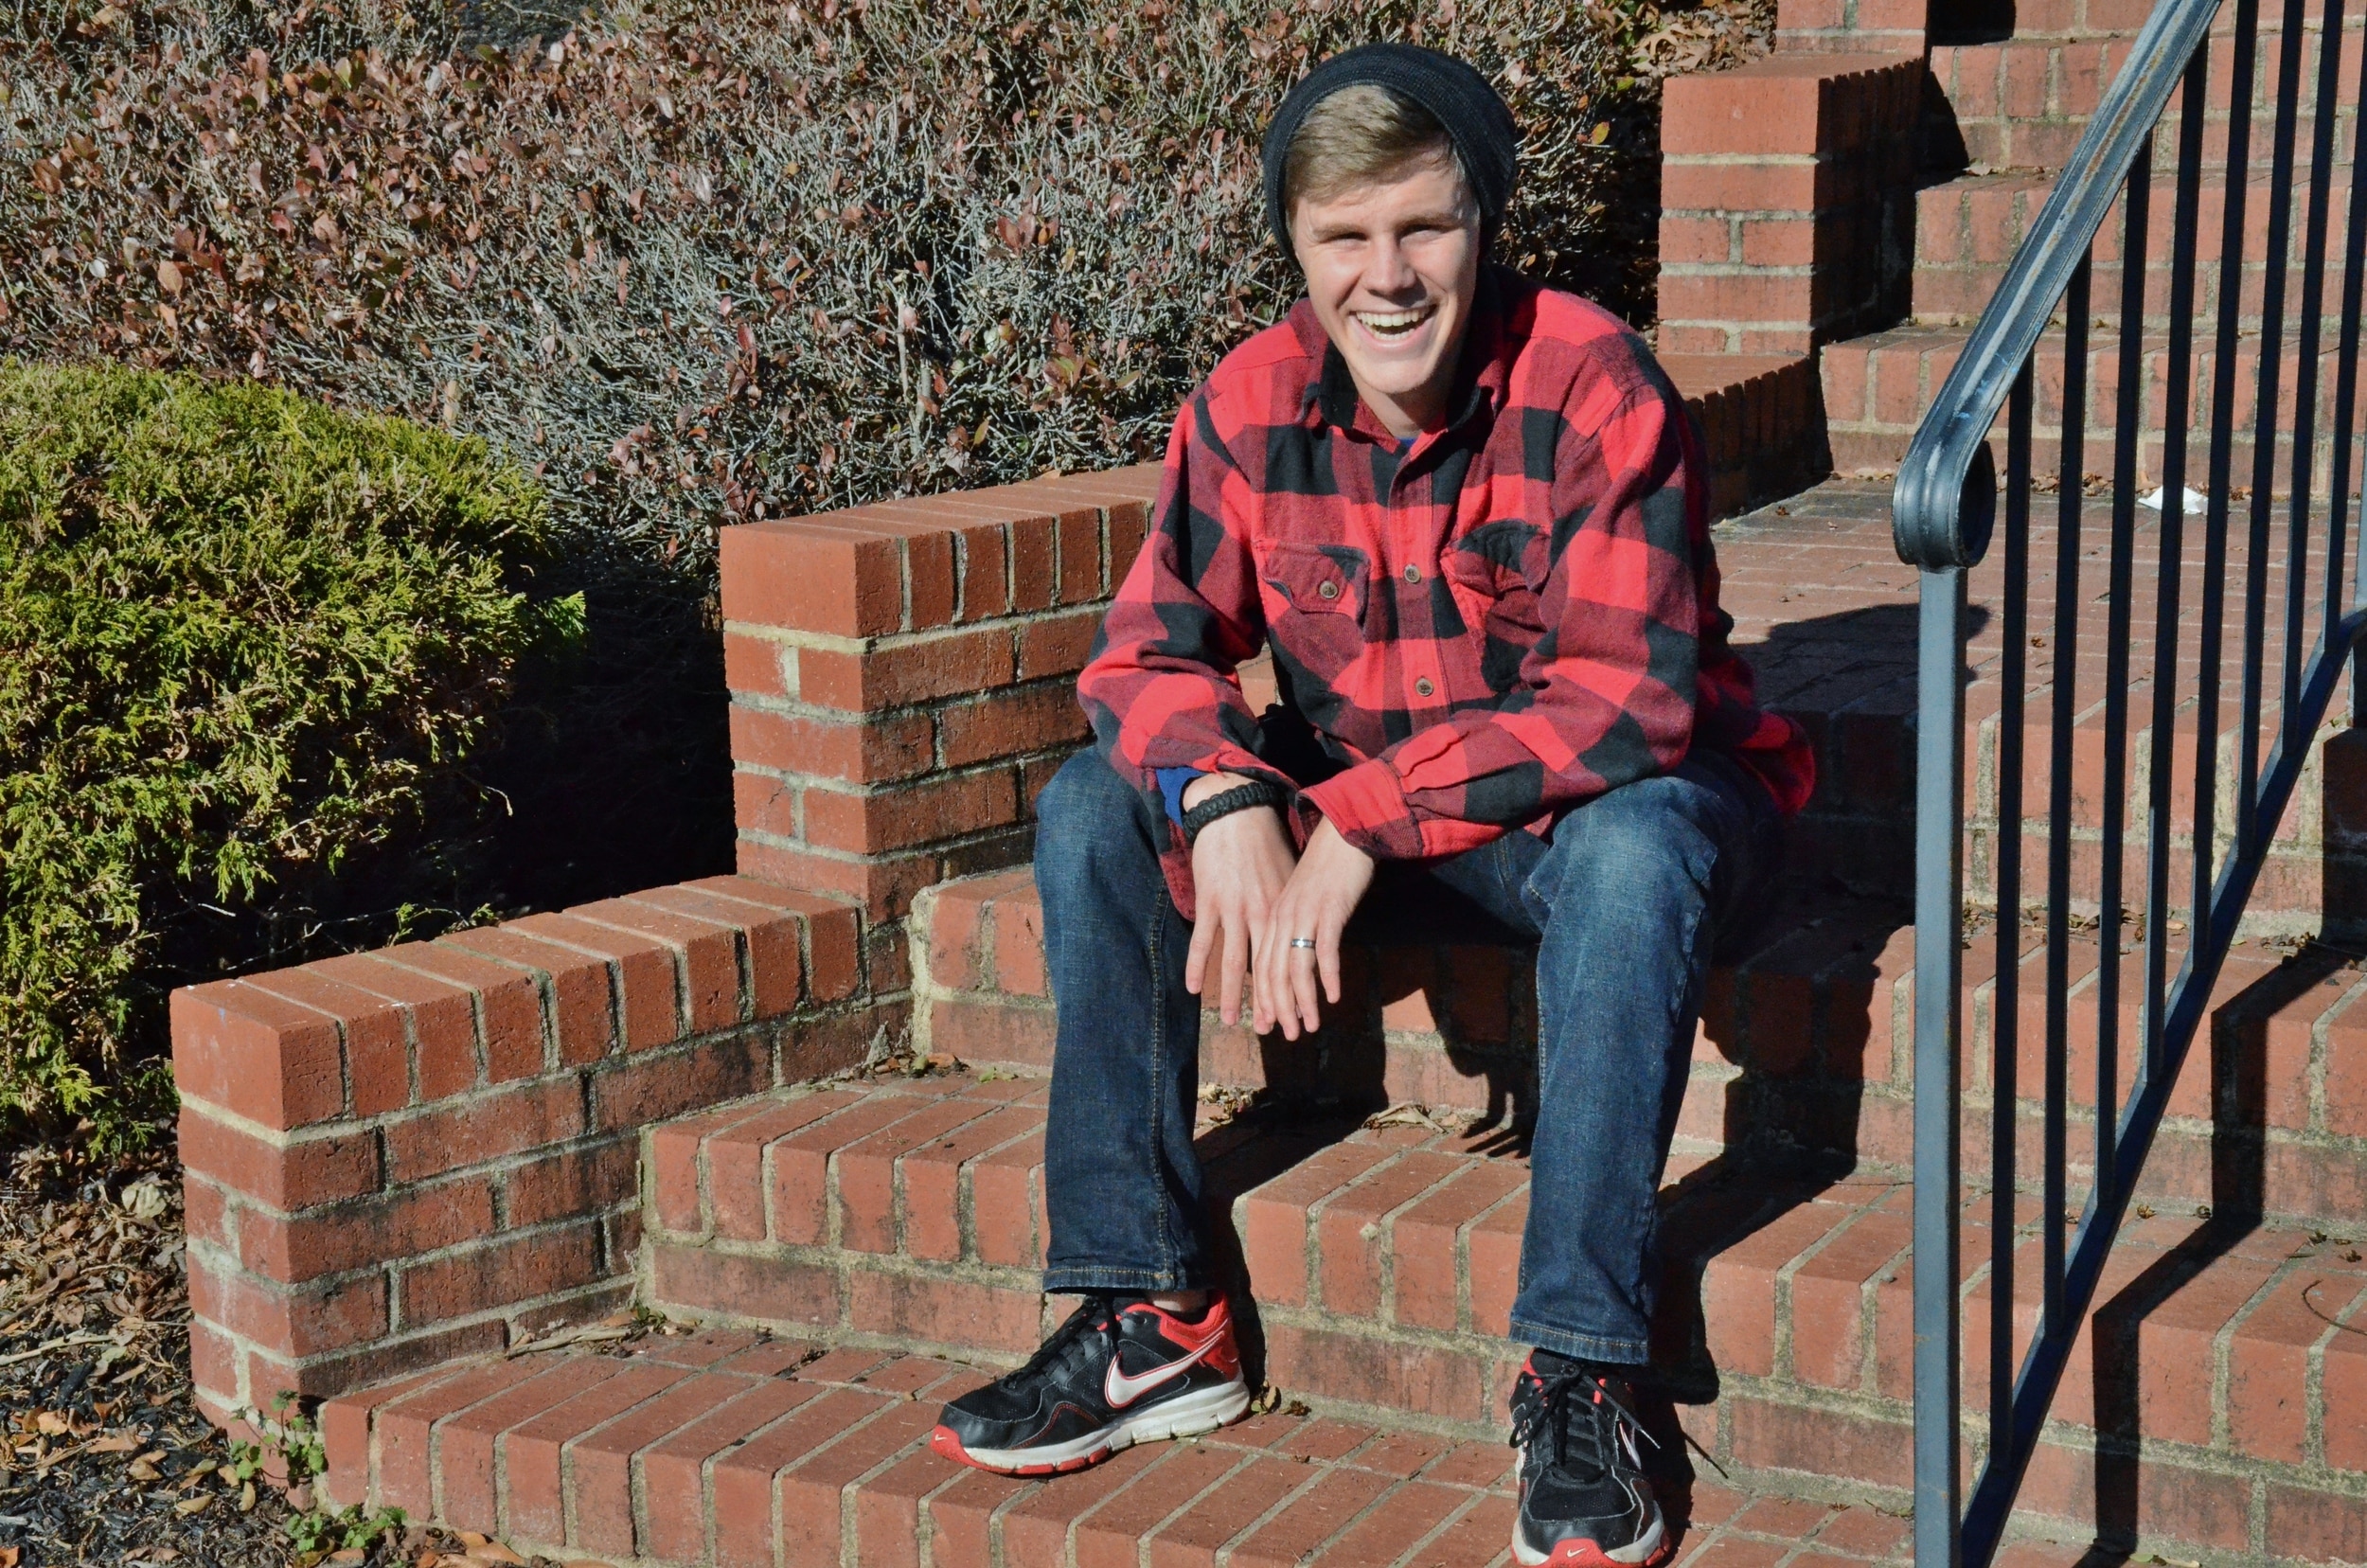 Jehu Jackson sports his casual winter outfit including blue jeans a red flannel long-sleeved shirt. Jackson said he bought his shoes from the Nike Store and most of his outfit he borrowed from his brother. Who doesn't love free stylish clothes?